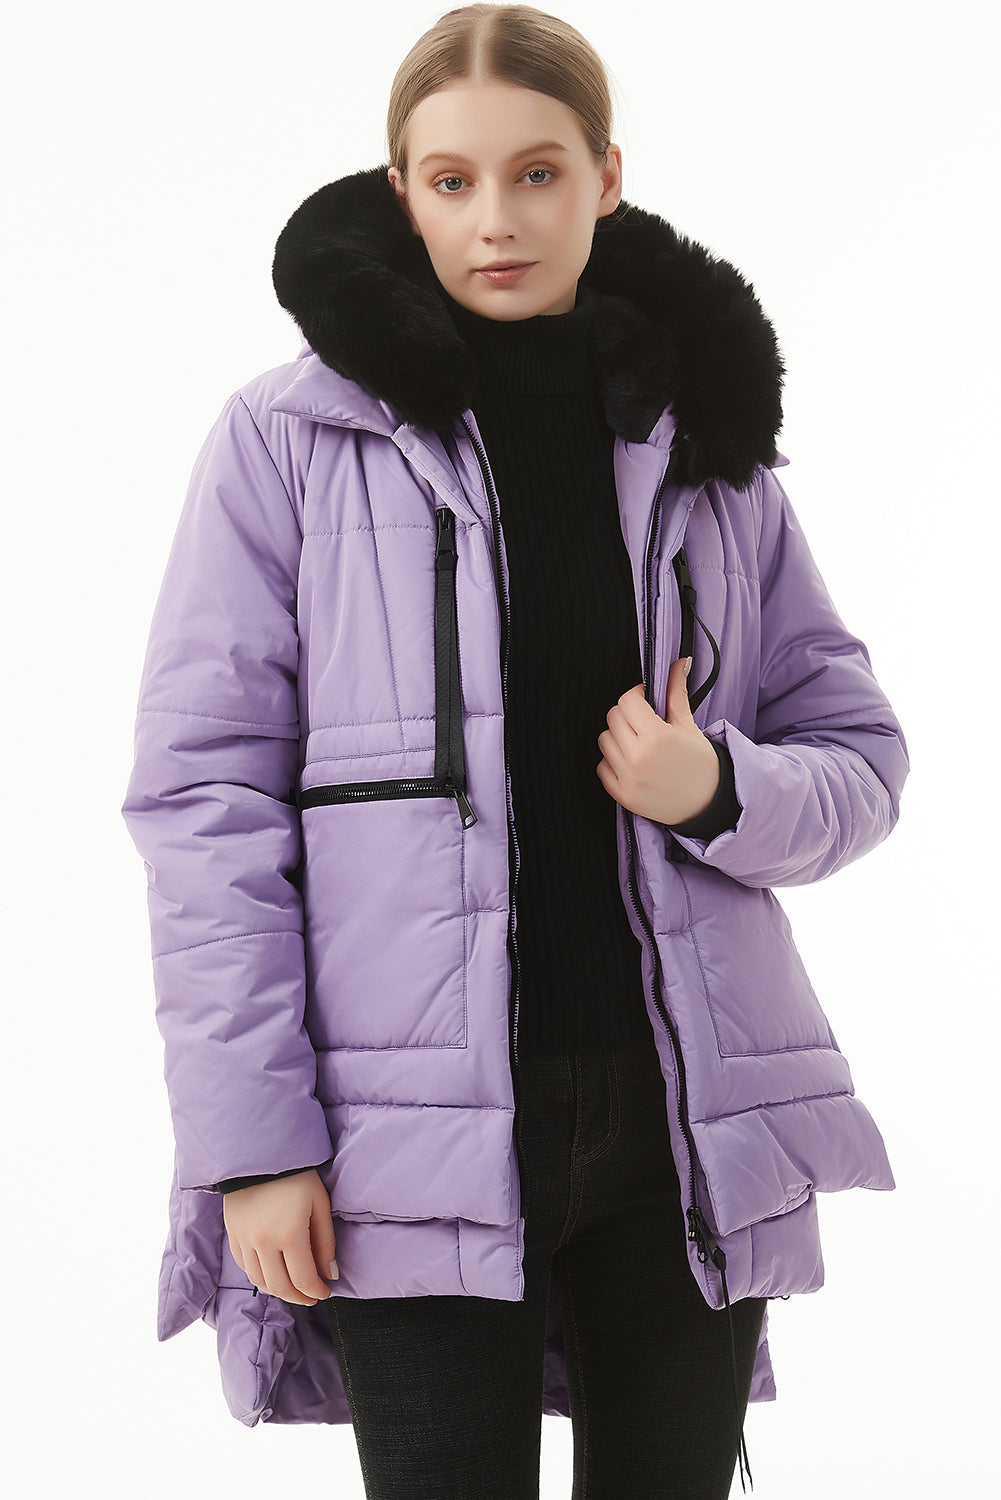 Wisteria 100%Polyester - Wisteria Plush Linen Zip Up Hooded Puffer Coat - 7 colors - womens coat at TFC&H Co.